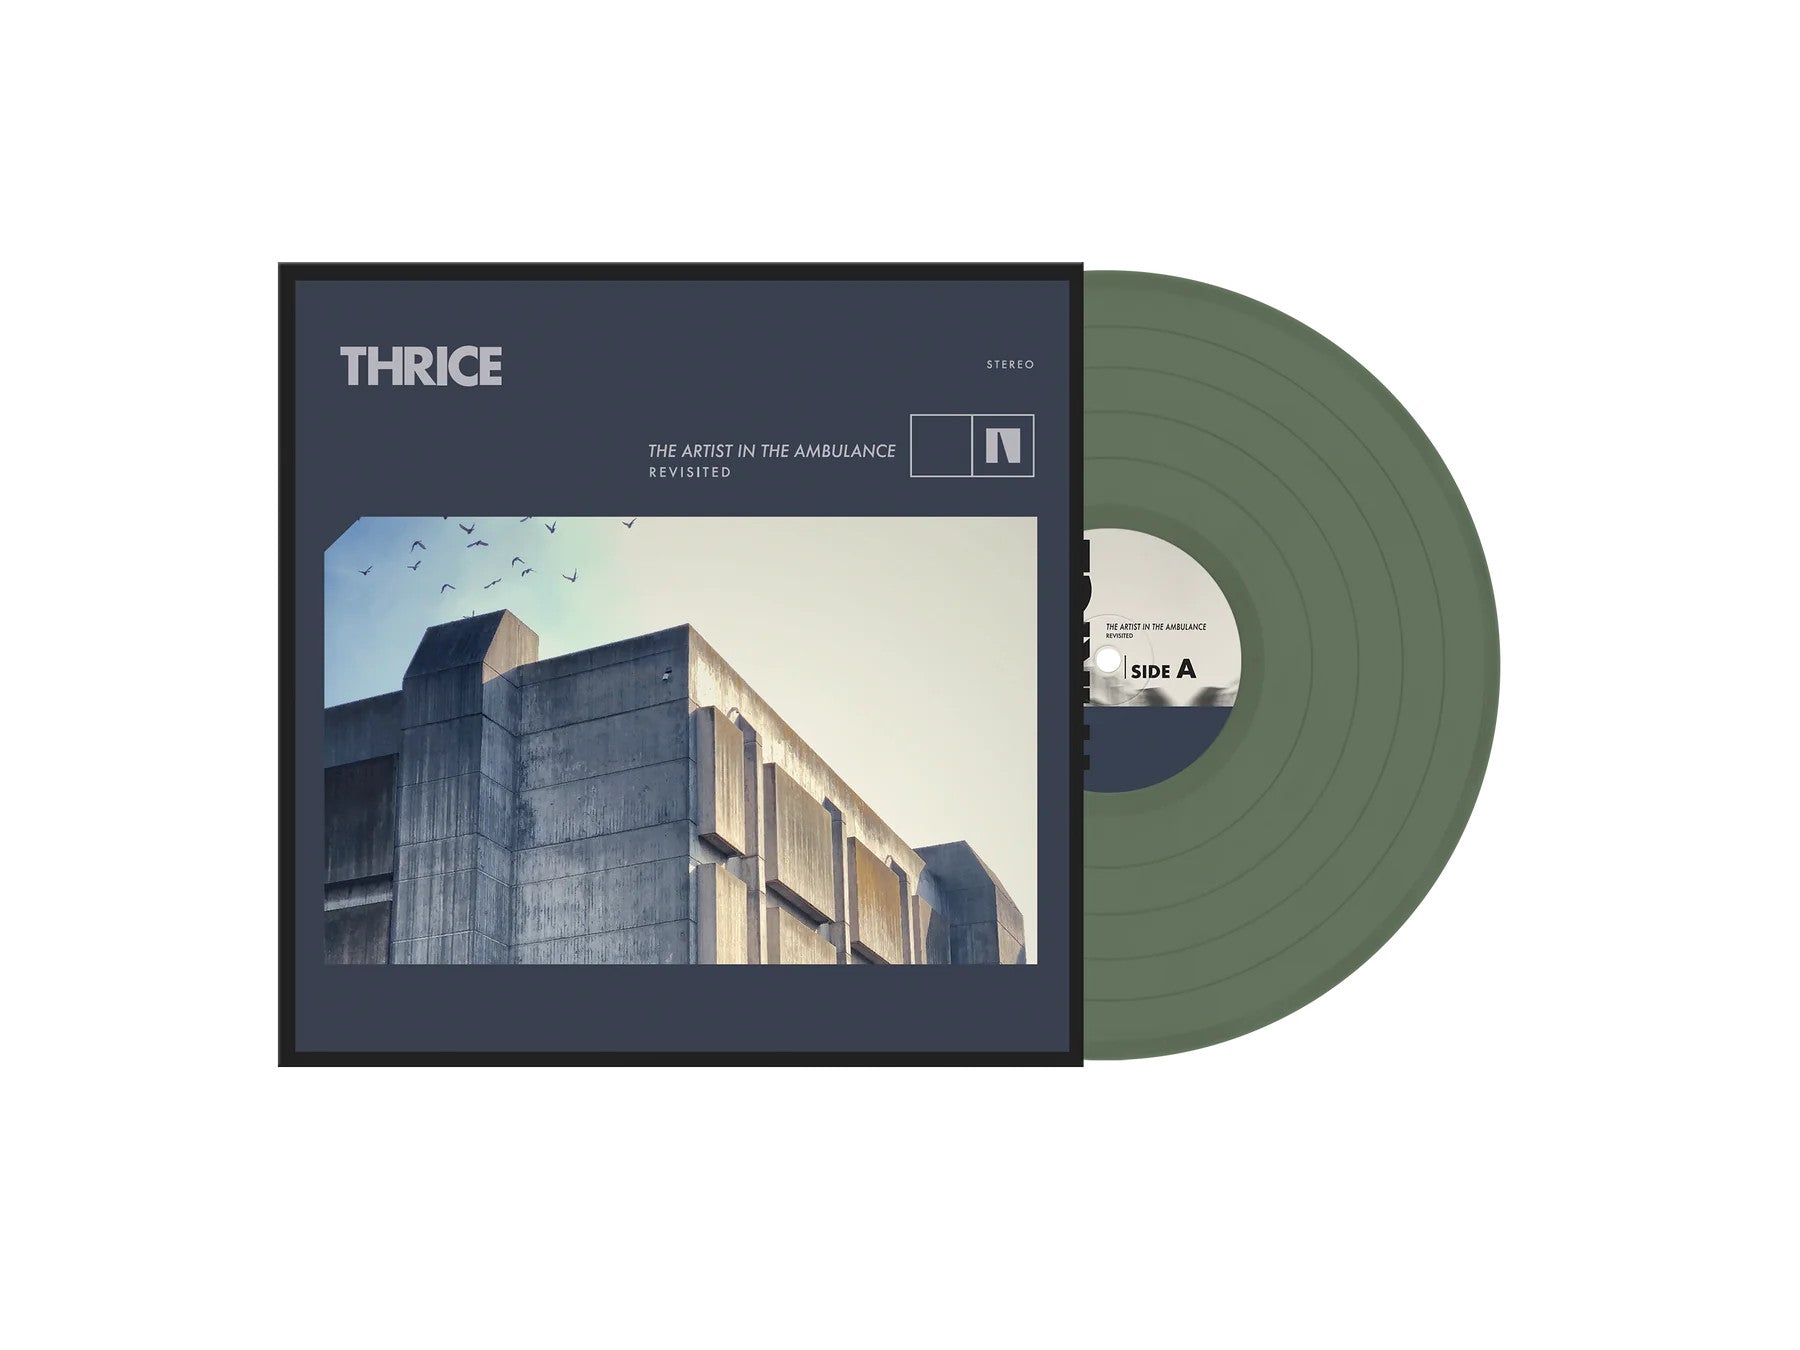 Thrice- The Artist In The Ambulance: Revisited (Indie Exclusive Green Vinyl) (PREORDER) - Darkside Records